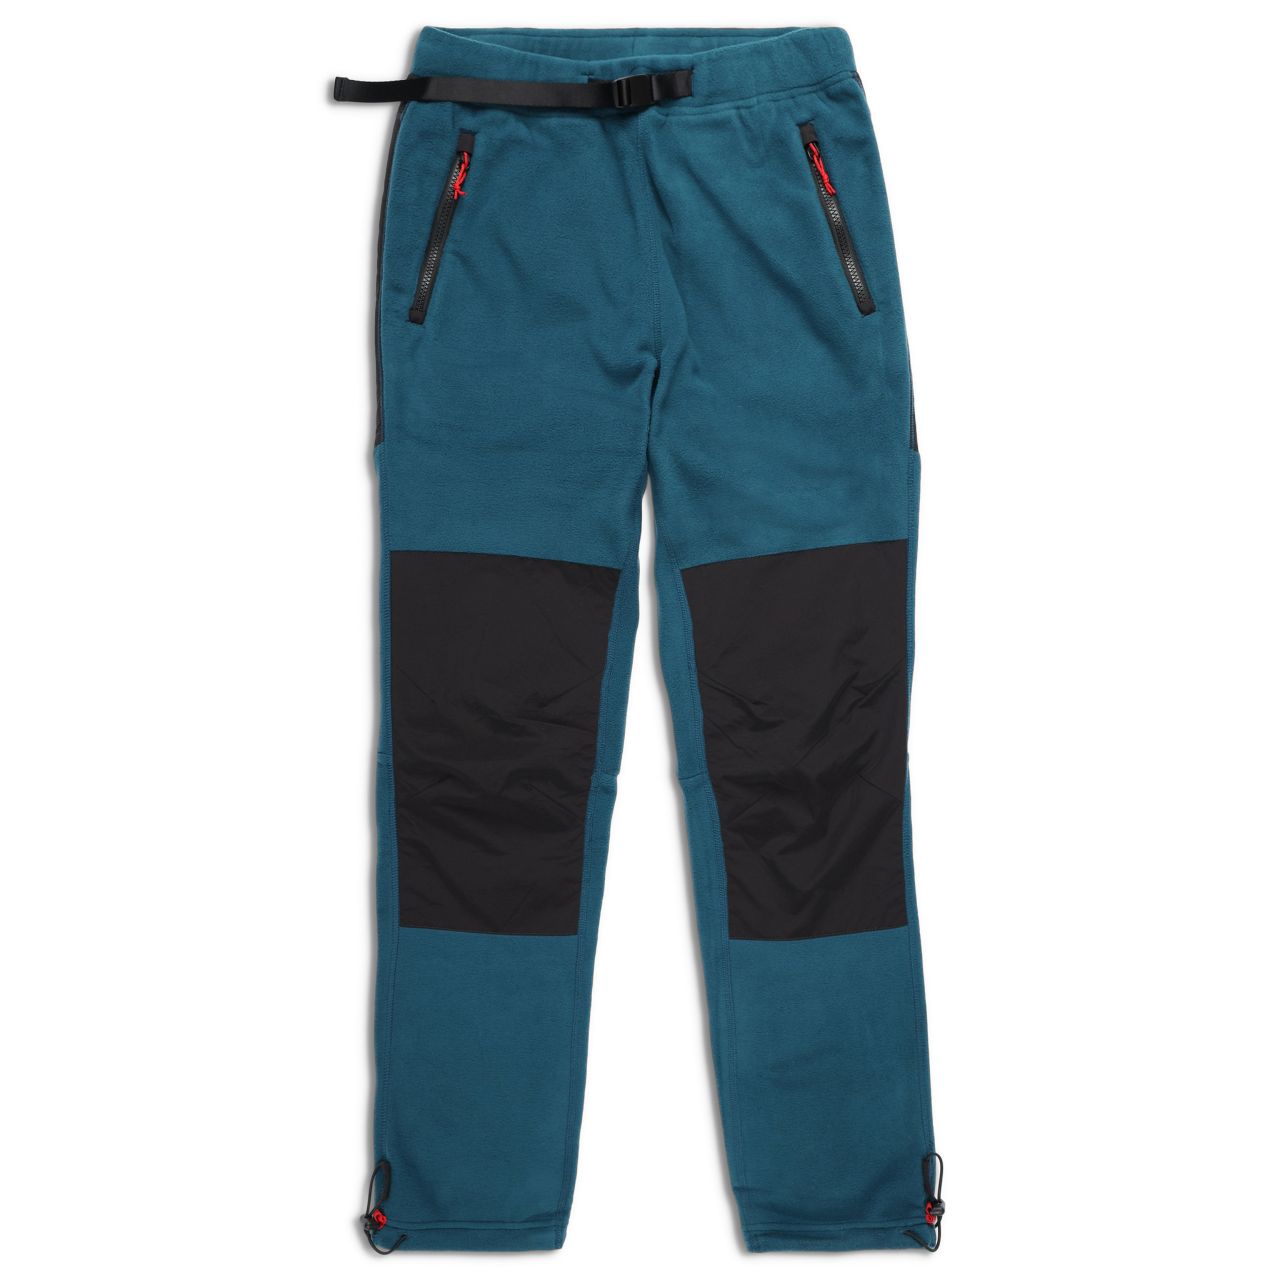 CMP Pant Ripstop - Mountaineering Trousers Men's